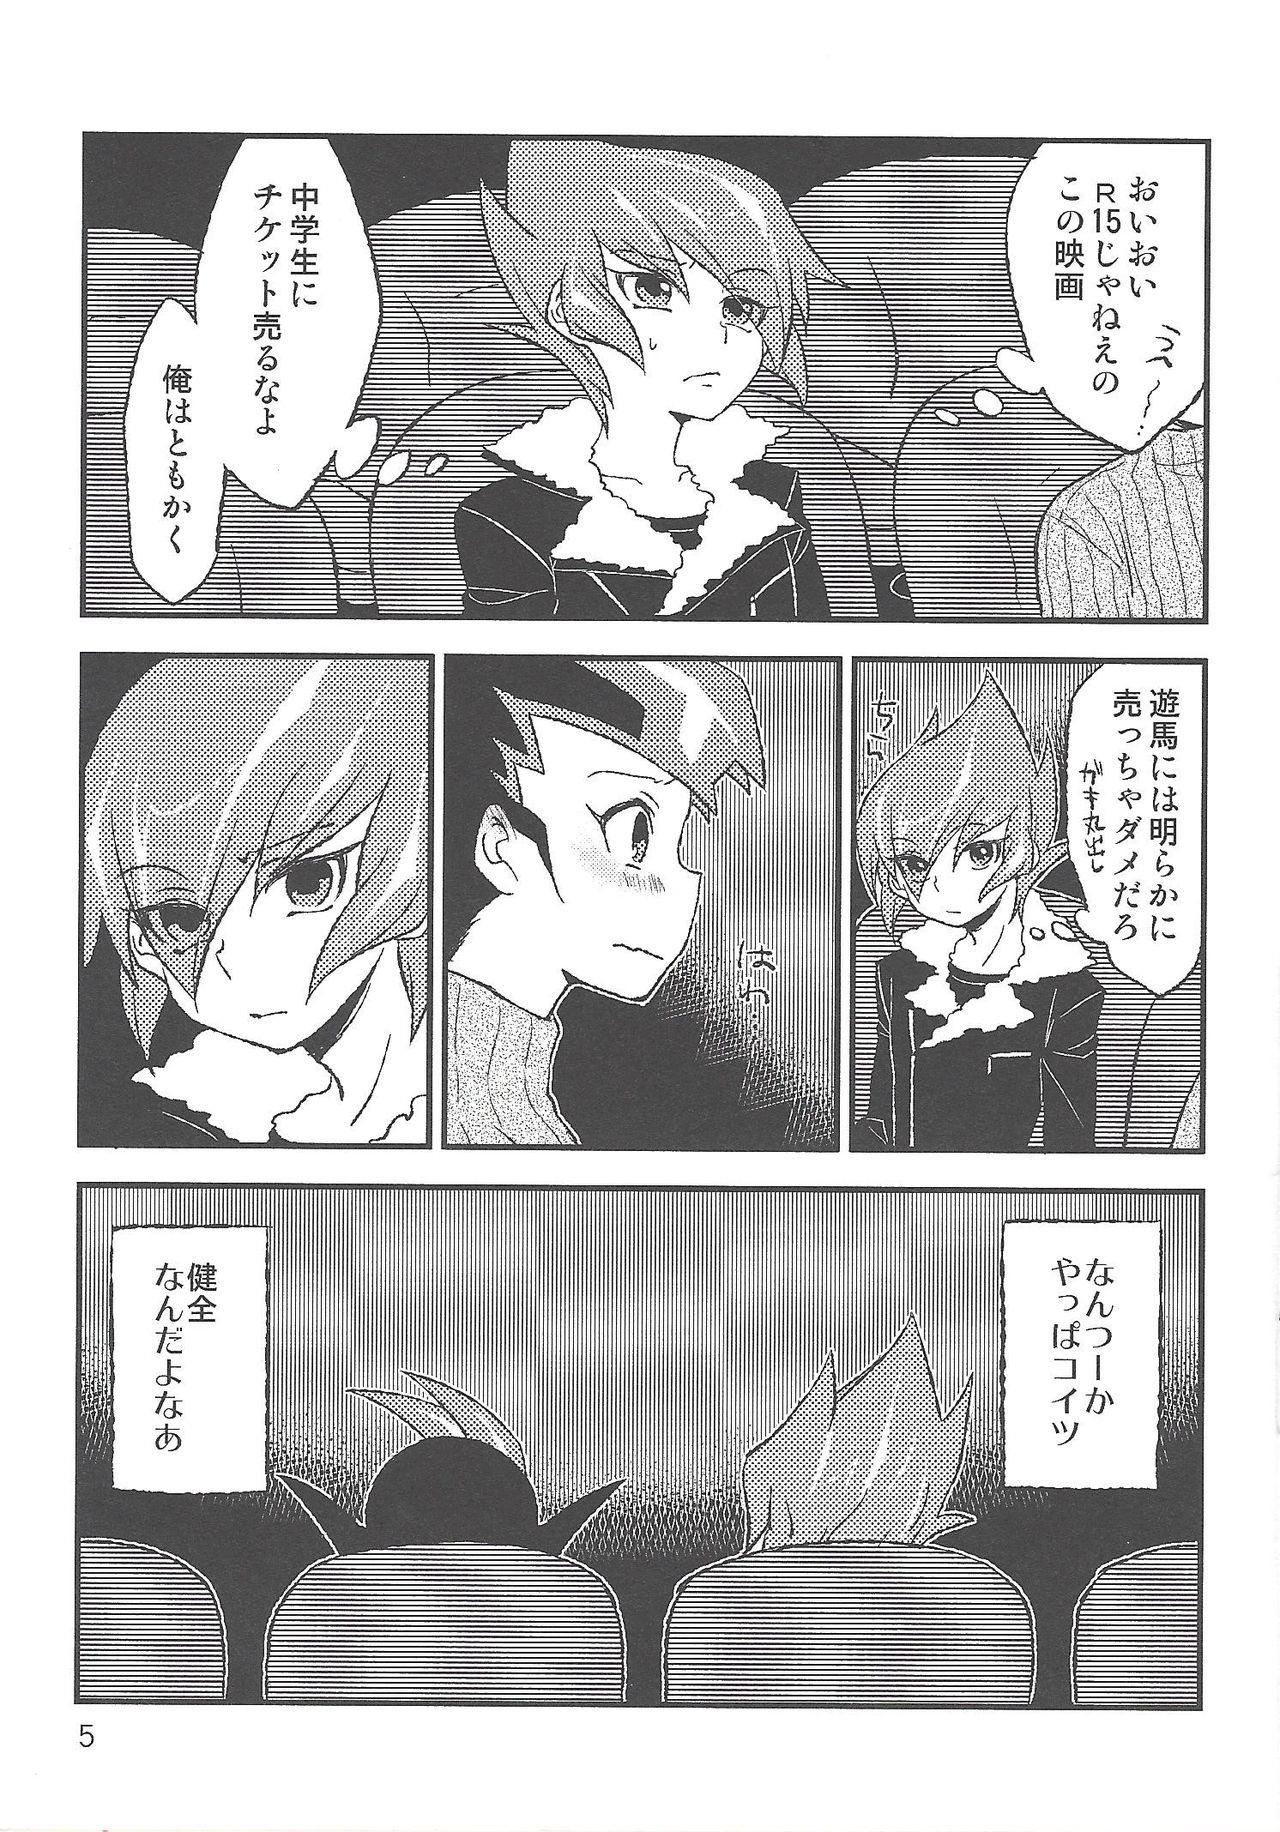 Muscle INSTANT ROOM - Yu-gi-oh zexal Brother - Page 6